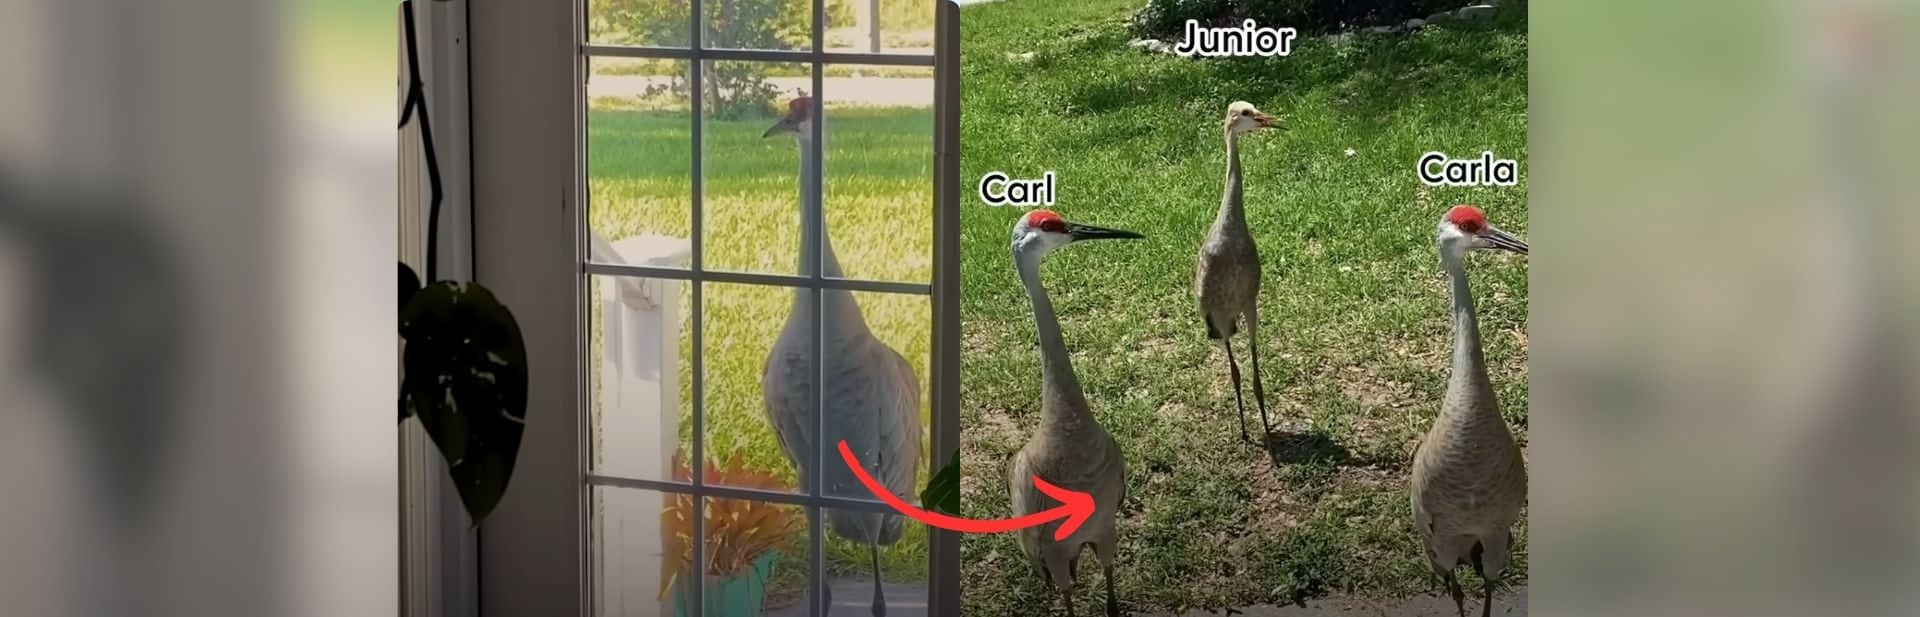 Friendly Crane Becomes Unlikely Neighbor, Bringing Surprising Guests to Woman’s Doorstep